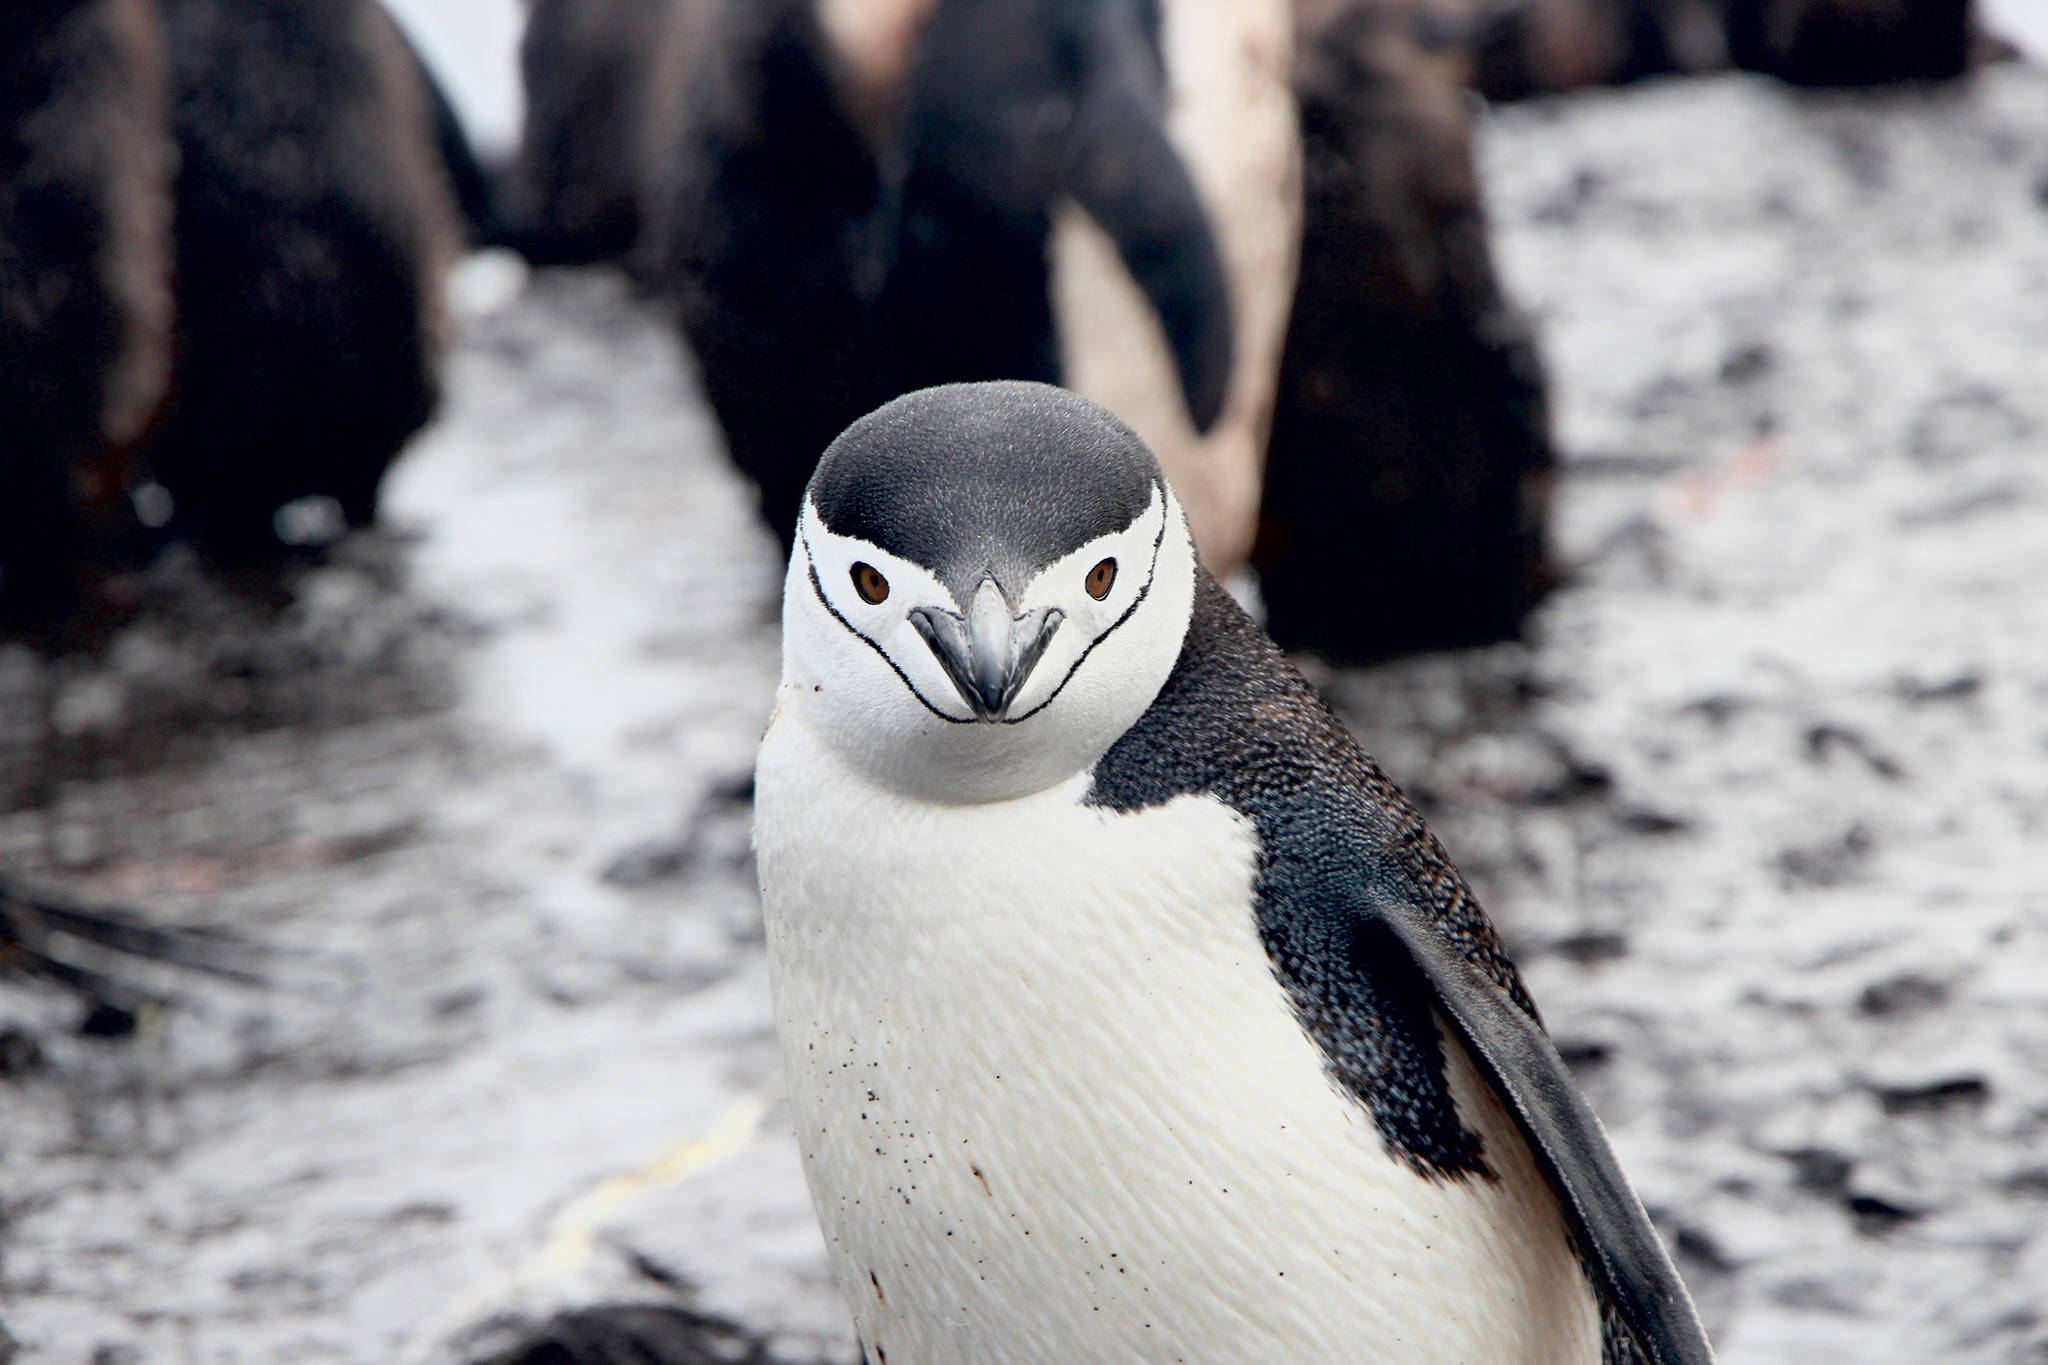 Chinstrap penguins such as this one will be one of the subjects of an upcoming free Audubon Society lecture. (Unsplash | Eamonn Maguire)                                Chinstrap penguins such as this one will be one of the subjects of an upcoming free Audubon Society lecture. (Unsplash | Eamonn Maguire)